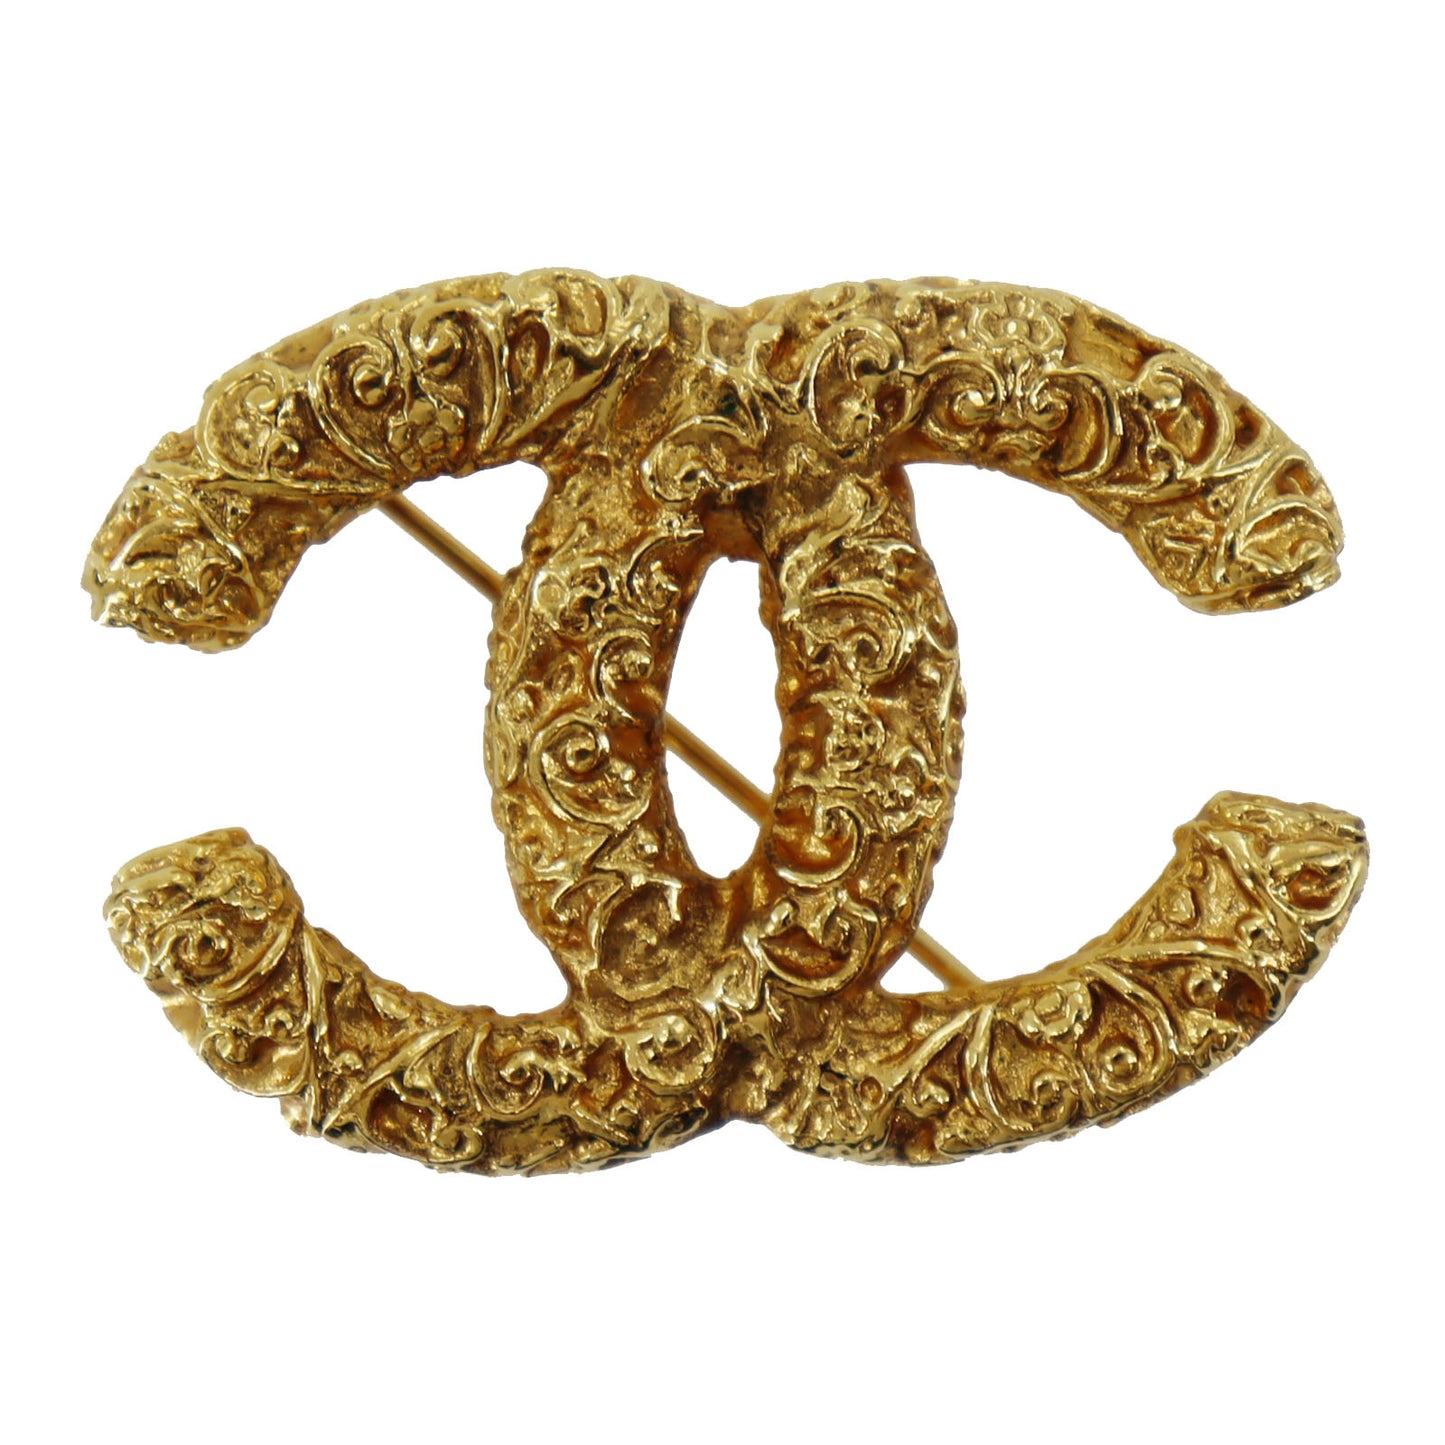 CHANEL CC Logos Pin Brooch Gold Plated #AG190